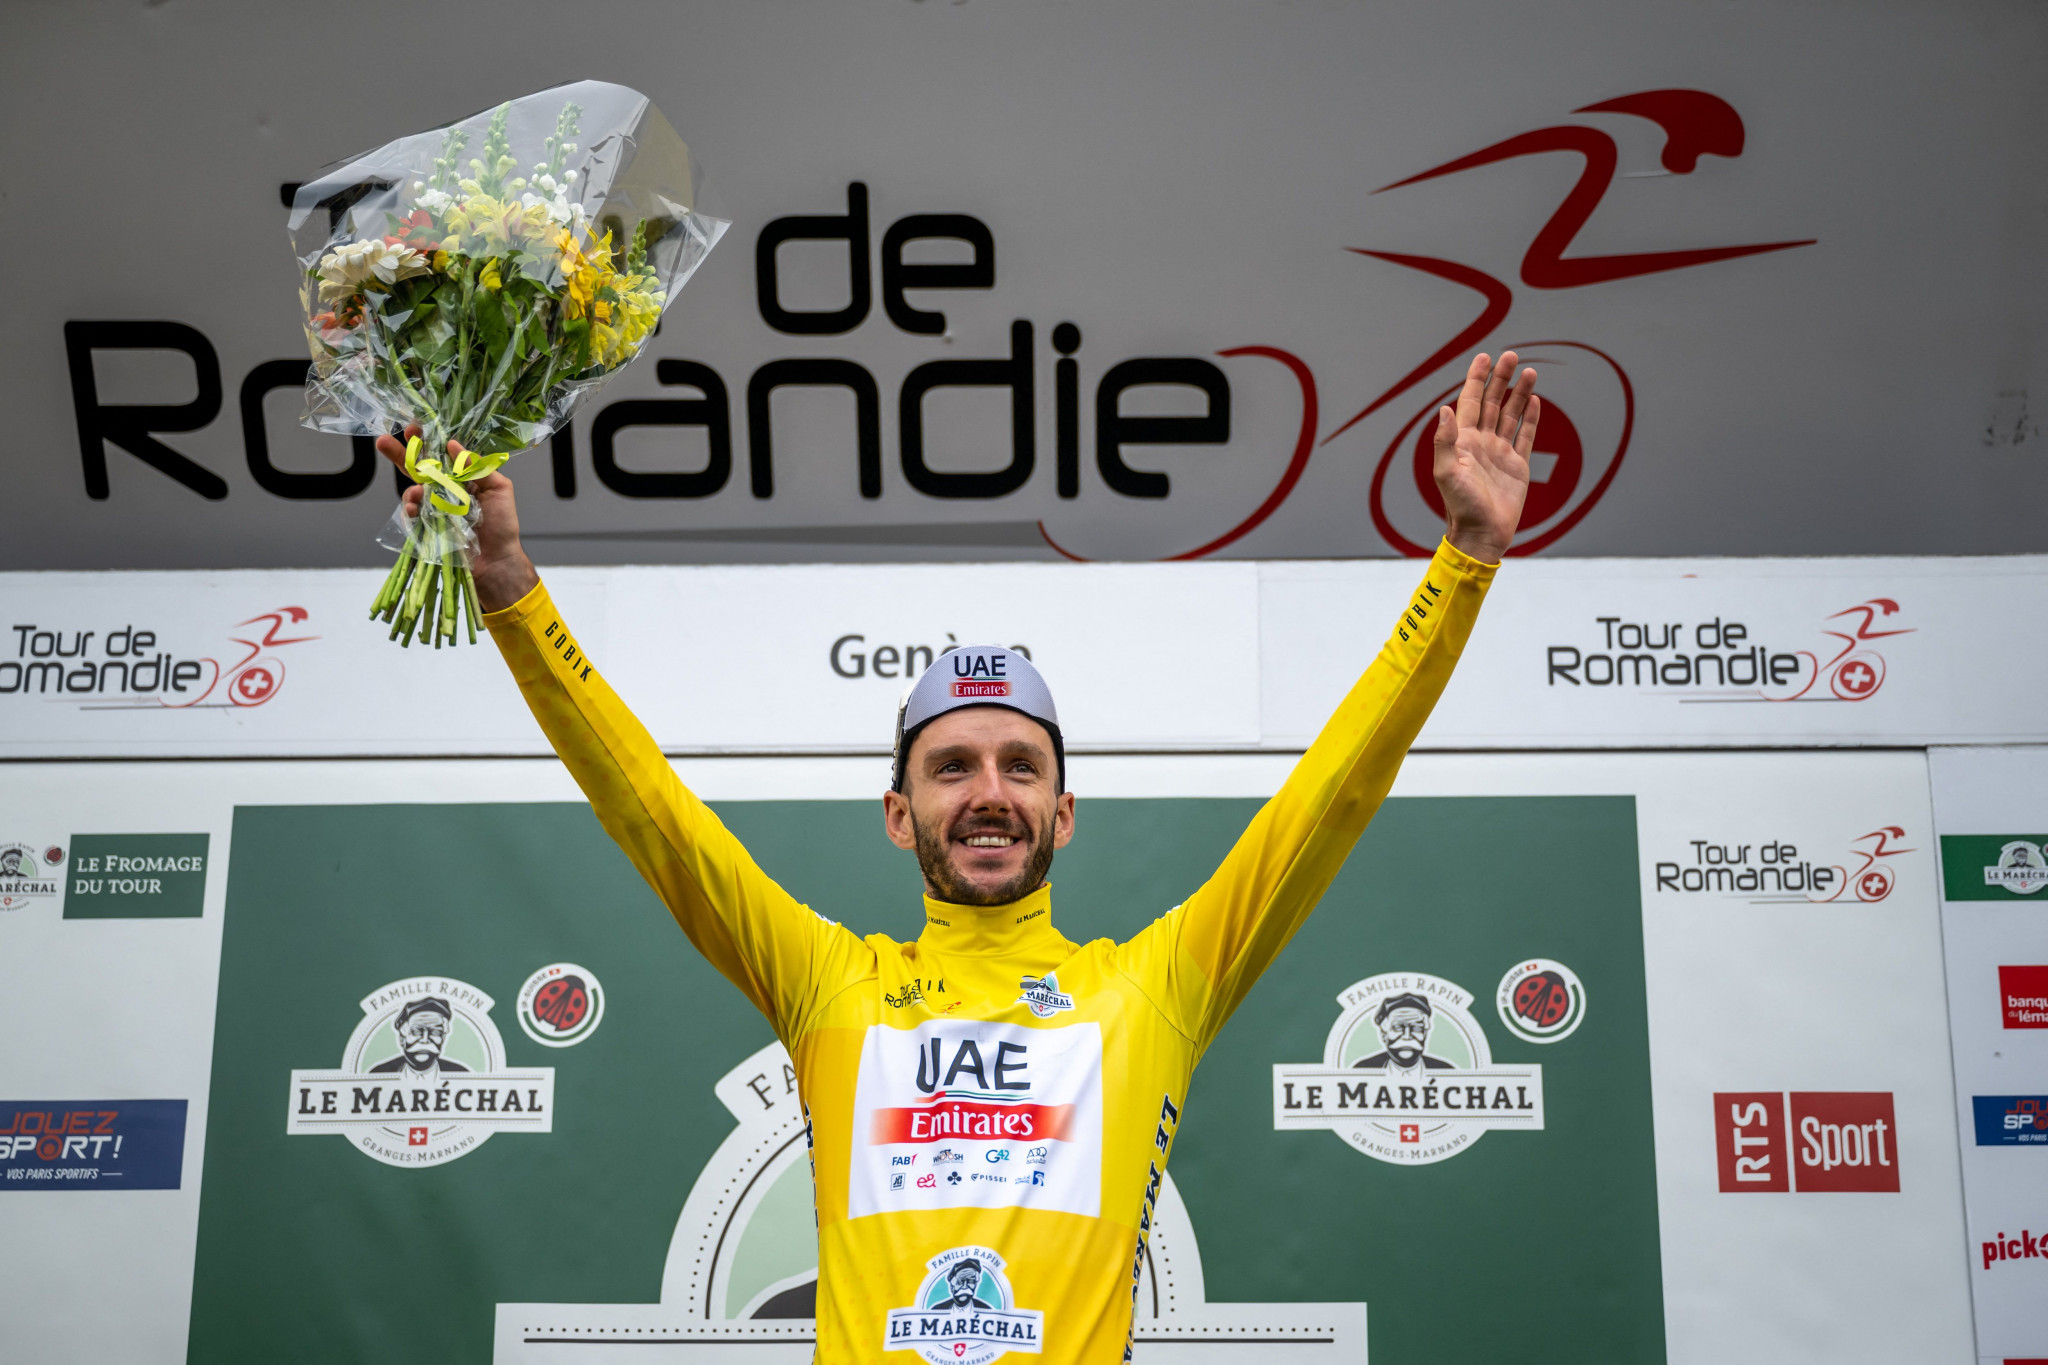 Britain's Adam Yates sealed the Tour de Romandie title at the final stage finishing in Geneva ©Getty Images